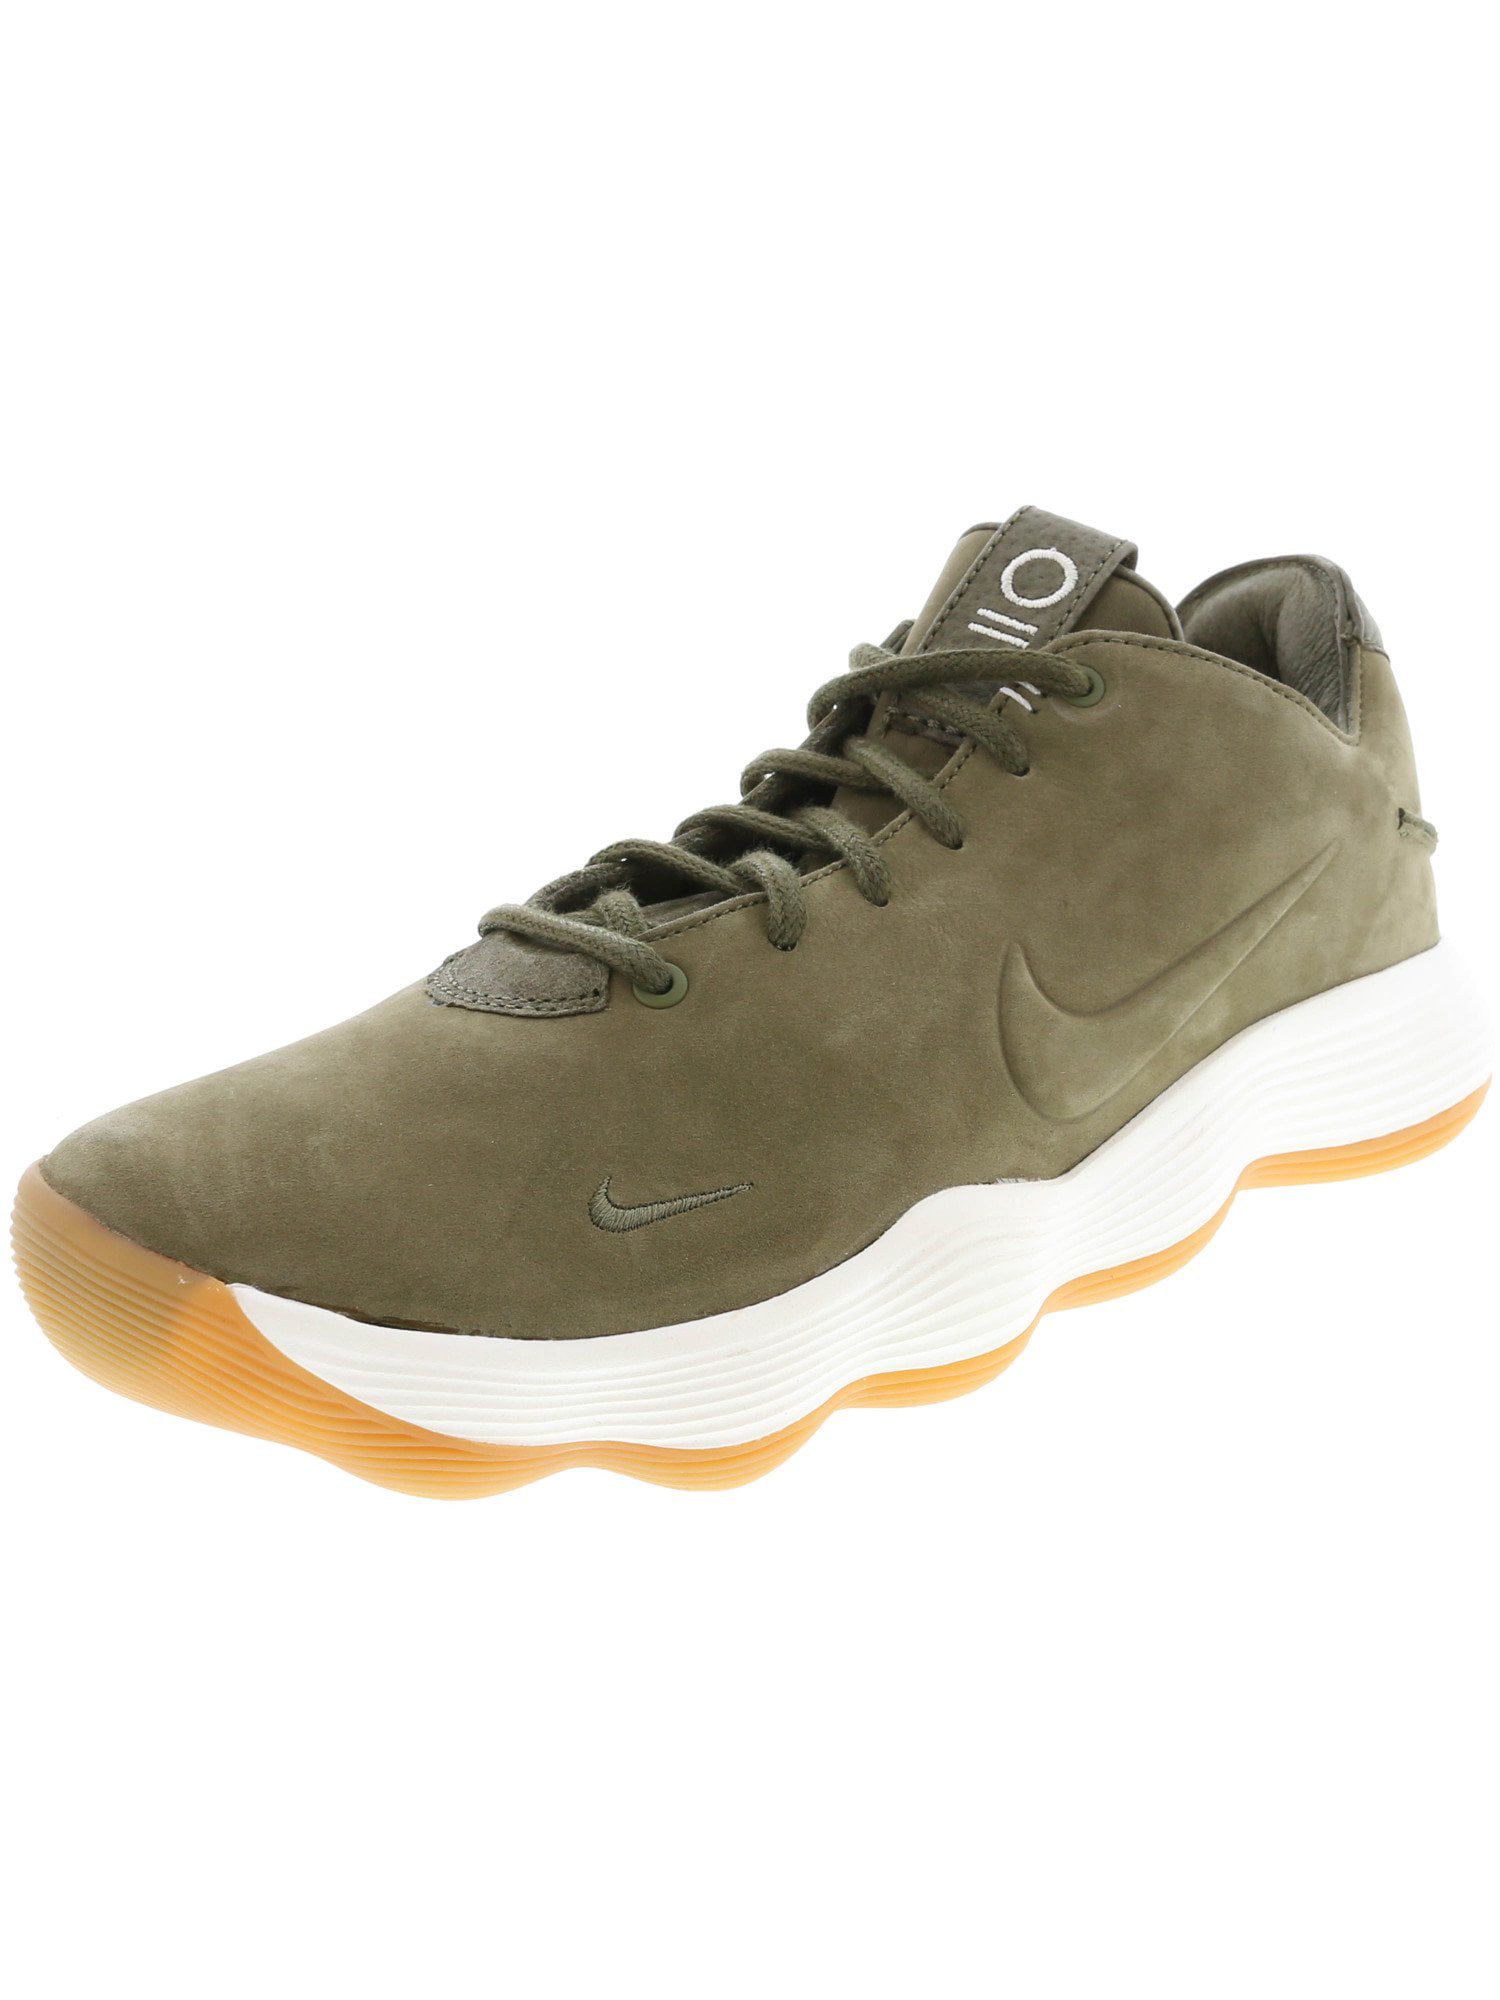 Ankle-High Suede Basketball Shoe 